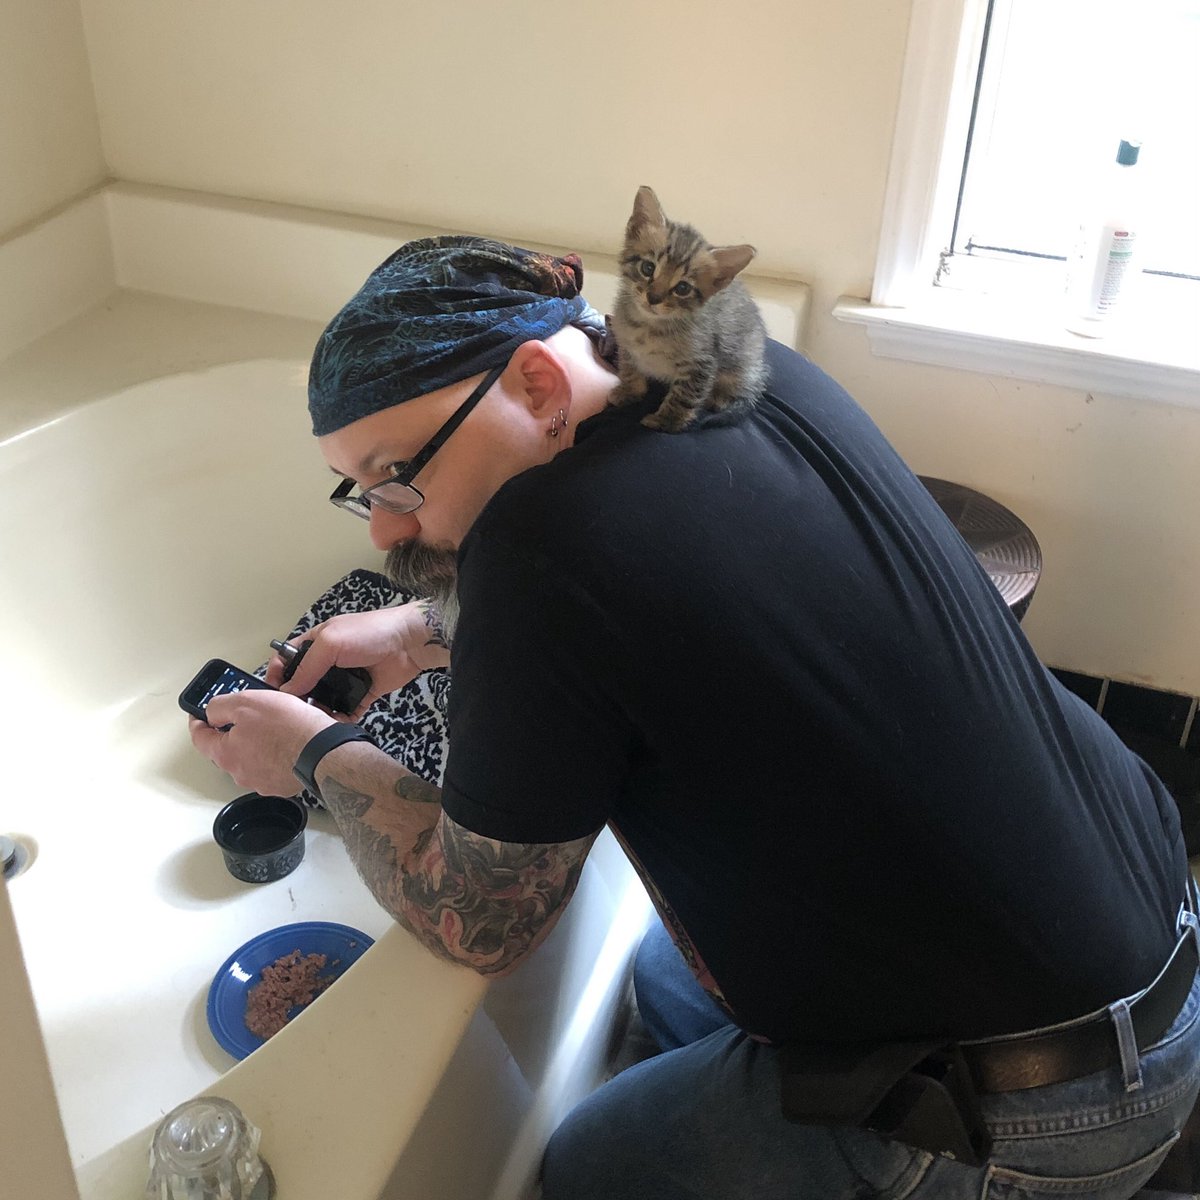 So I walk upstairs and find Kevin defeated as he attempts to set up a kitten refuge in the tub.